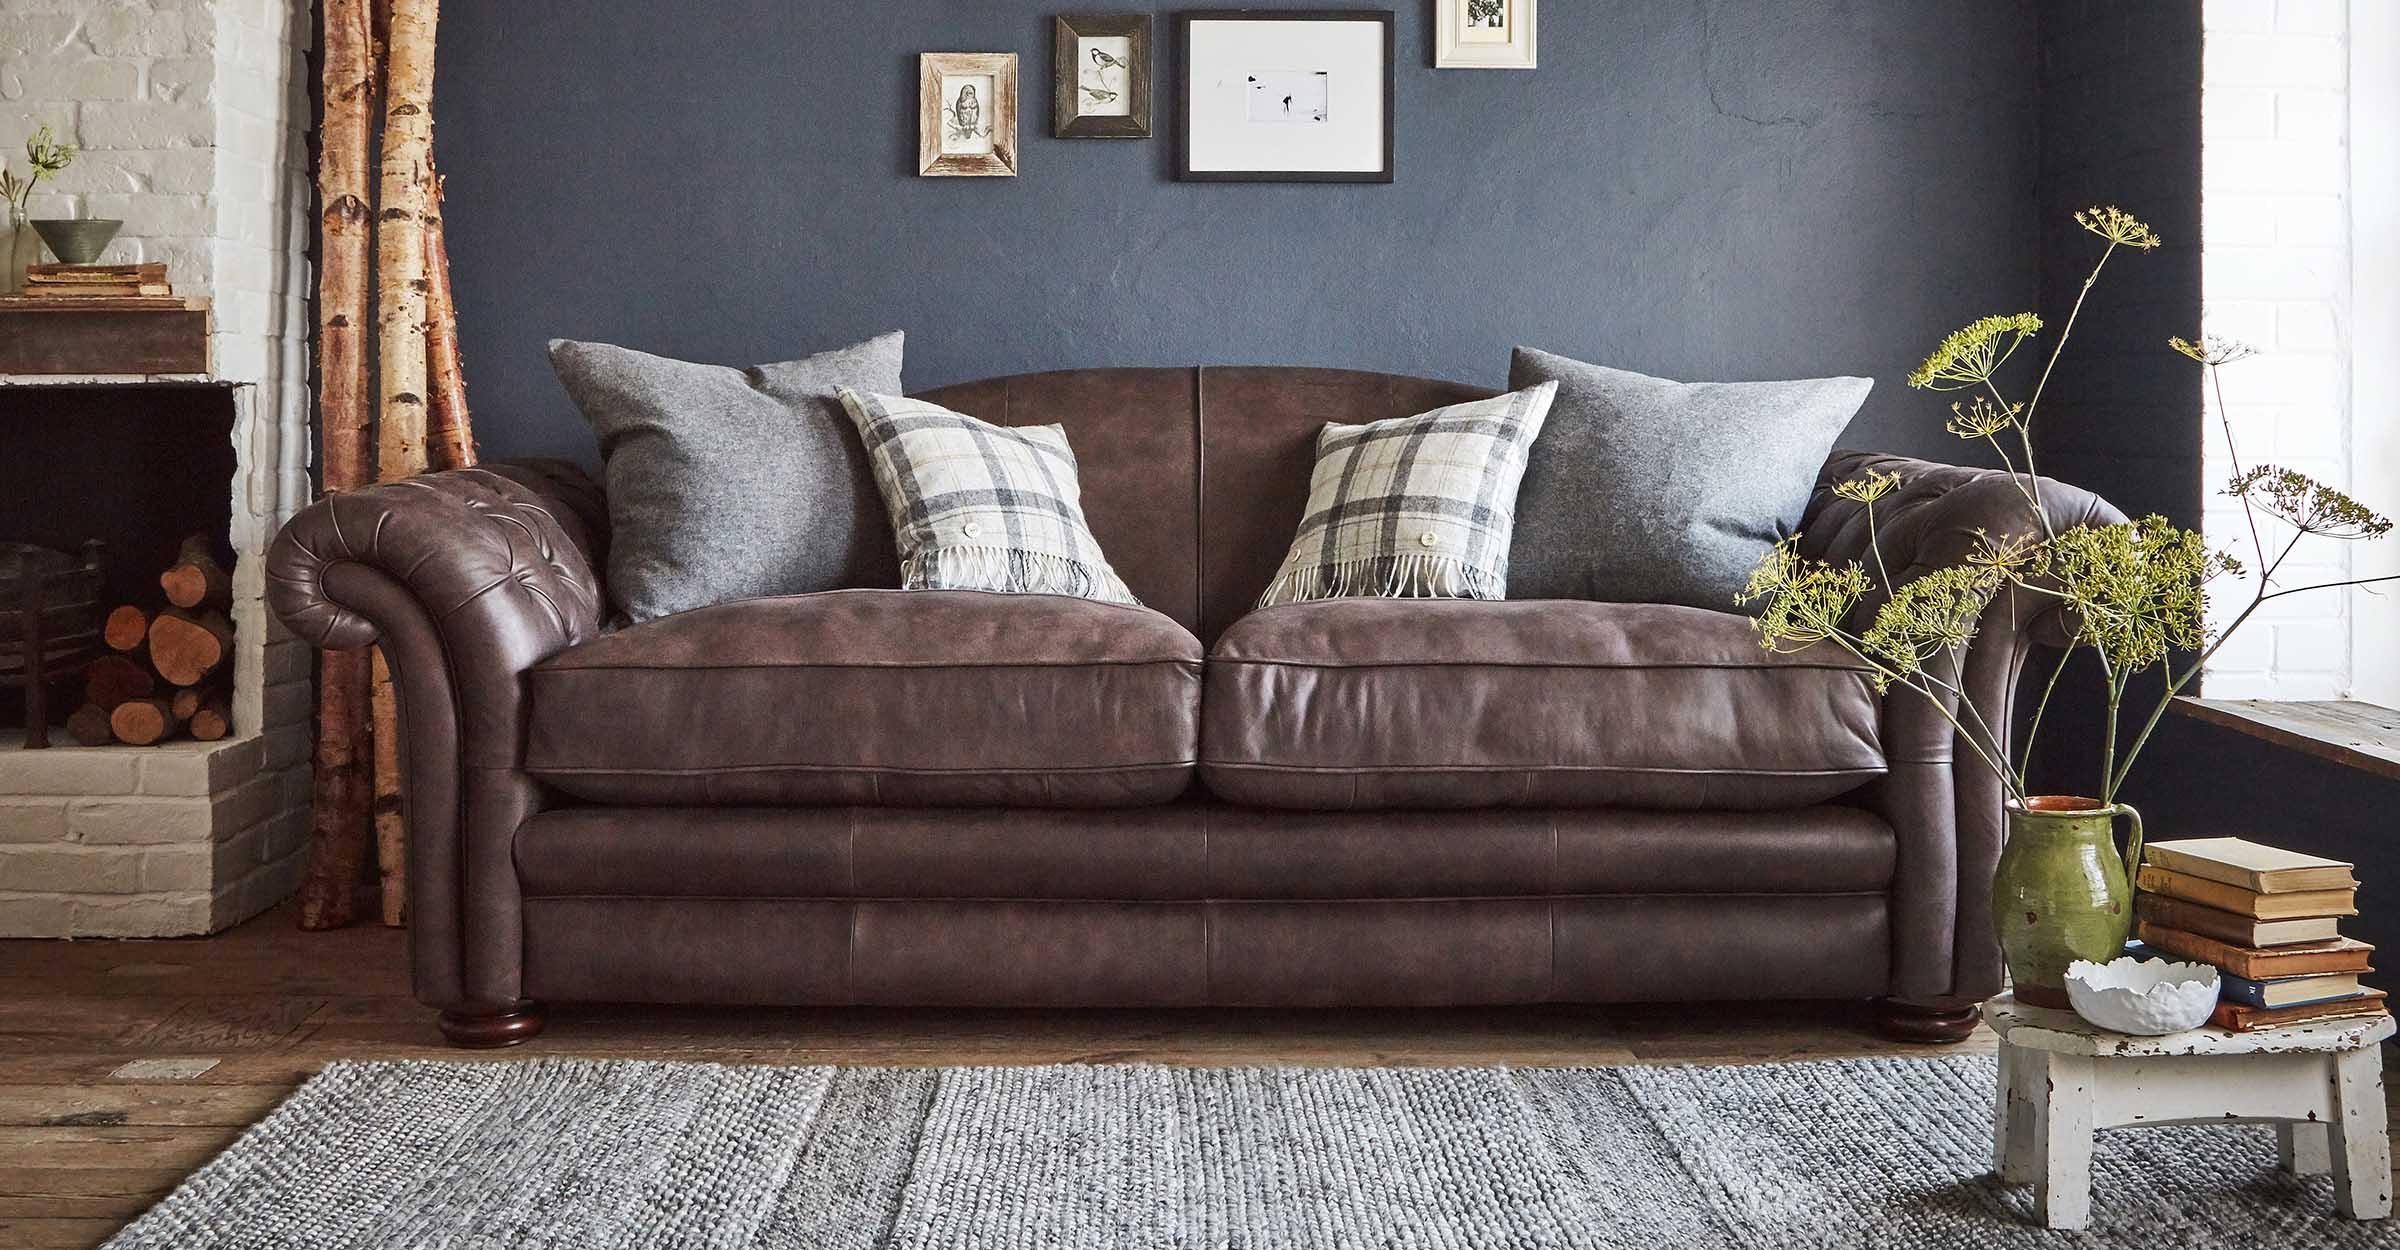 Finding your perfect brown sofa